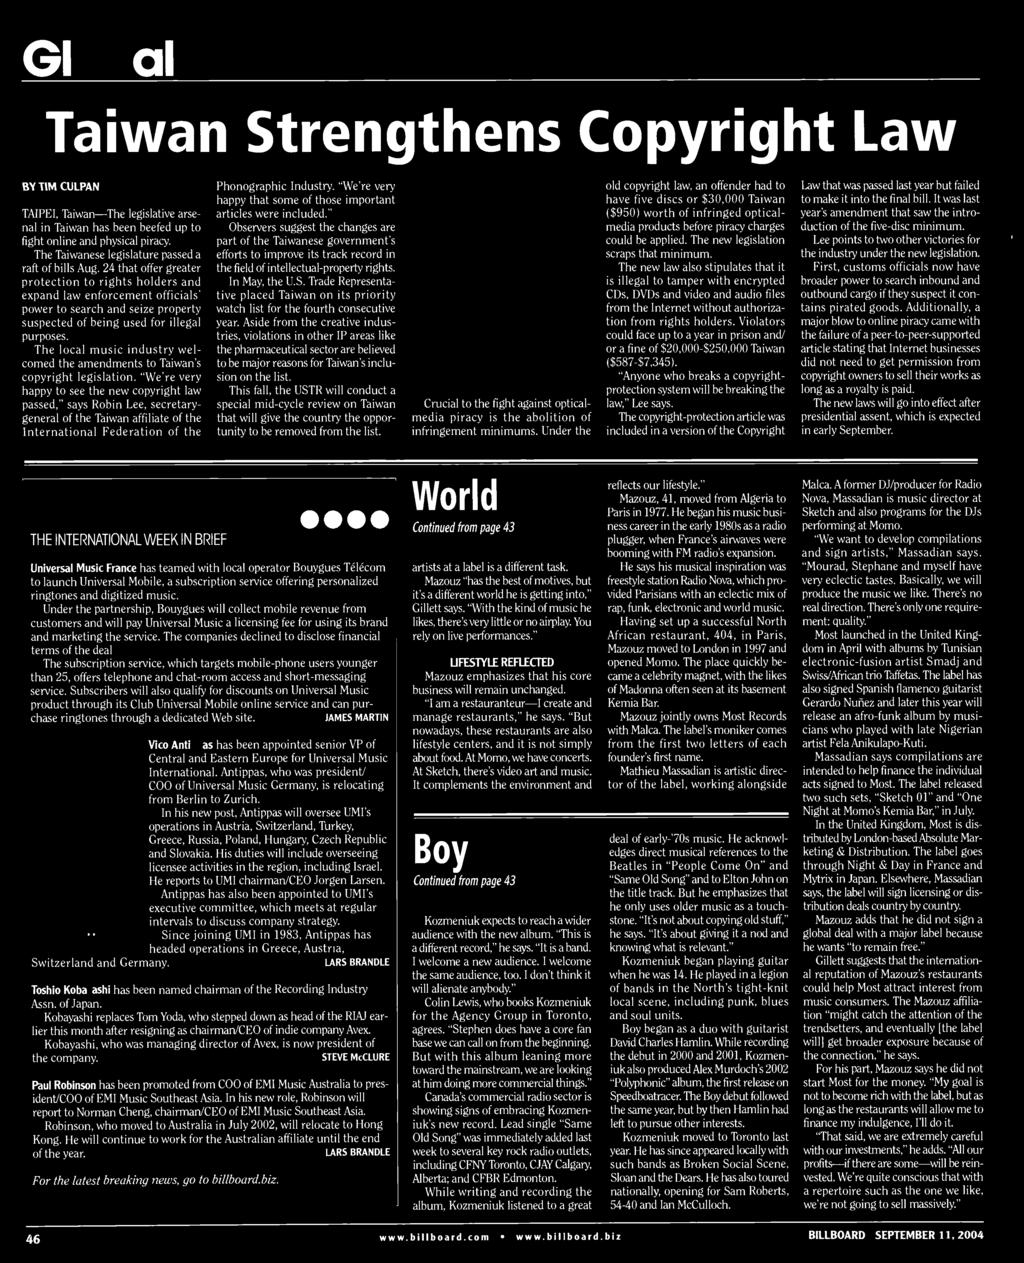 "We're very happy t see the new cpyright law passed," says Rbin Lee, secretarygeneral f the Taiwan affiliate f the Internatinal Federatin f the Phngraphic Industry.